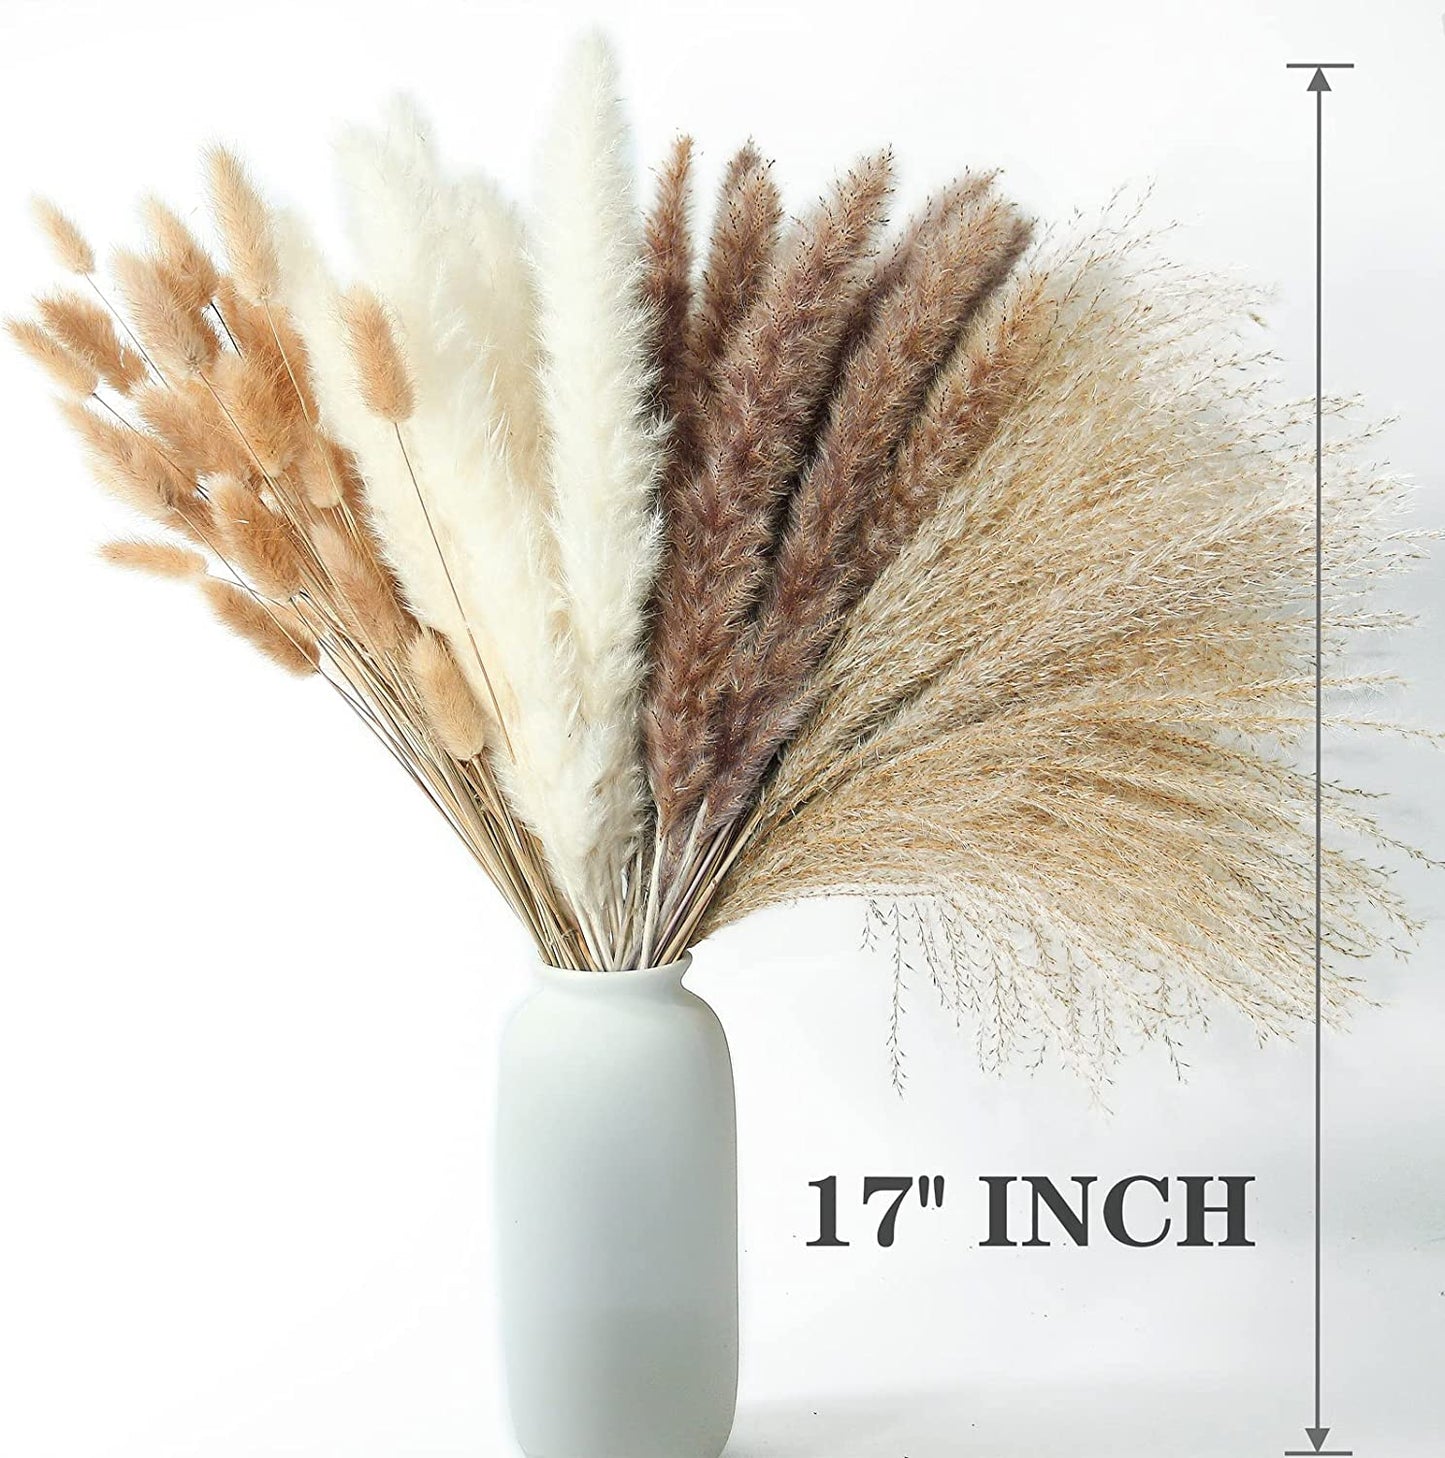 Dried Pampas Grass Decor, 100 PCS Pampas Grass Contains Bunny Tails Dried Flowers, Reed Grass Bouquet for Wedding Boho Flowers Home Table Decor, Rustic Farmhouse Party (White and Brown)